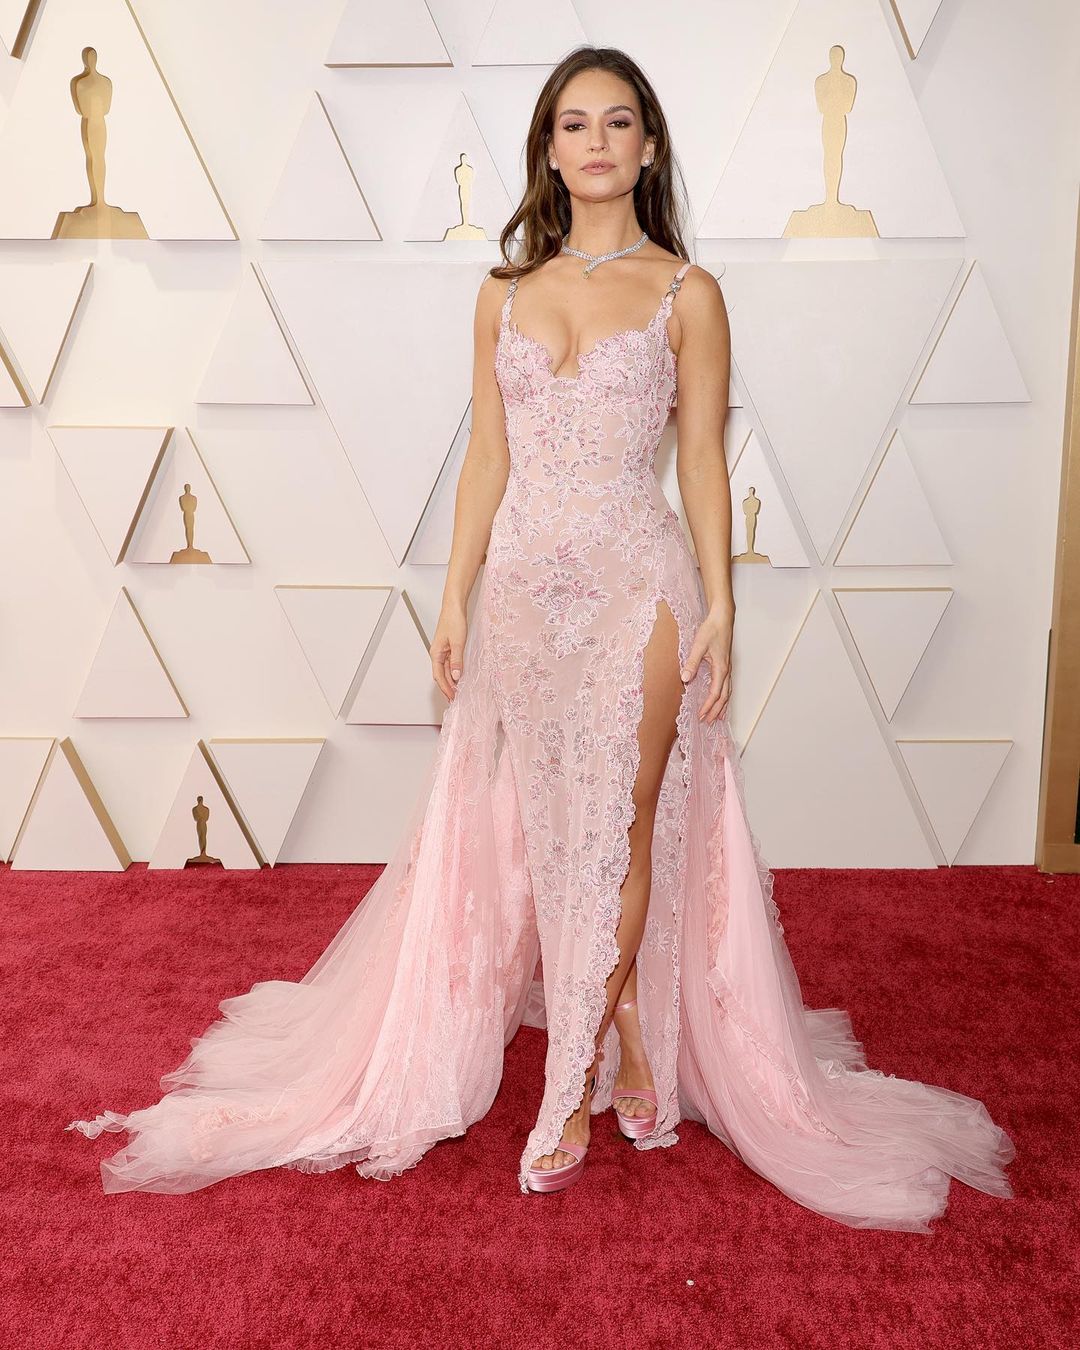 Lily James looks beautiful in the pastel pink Atelier Versace dress